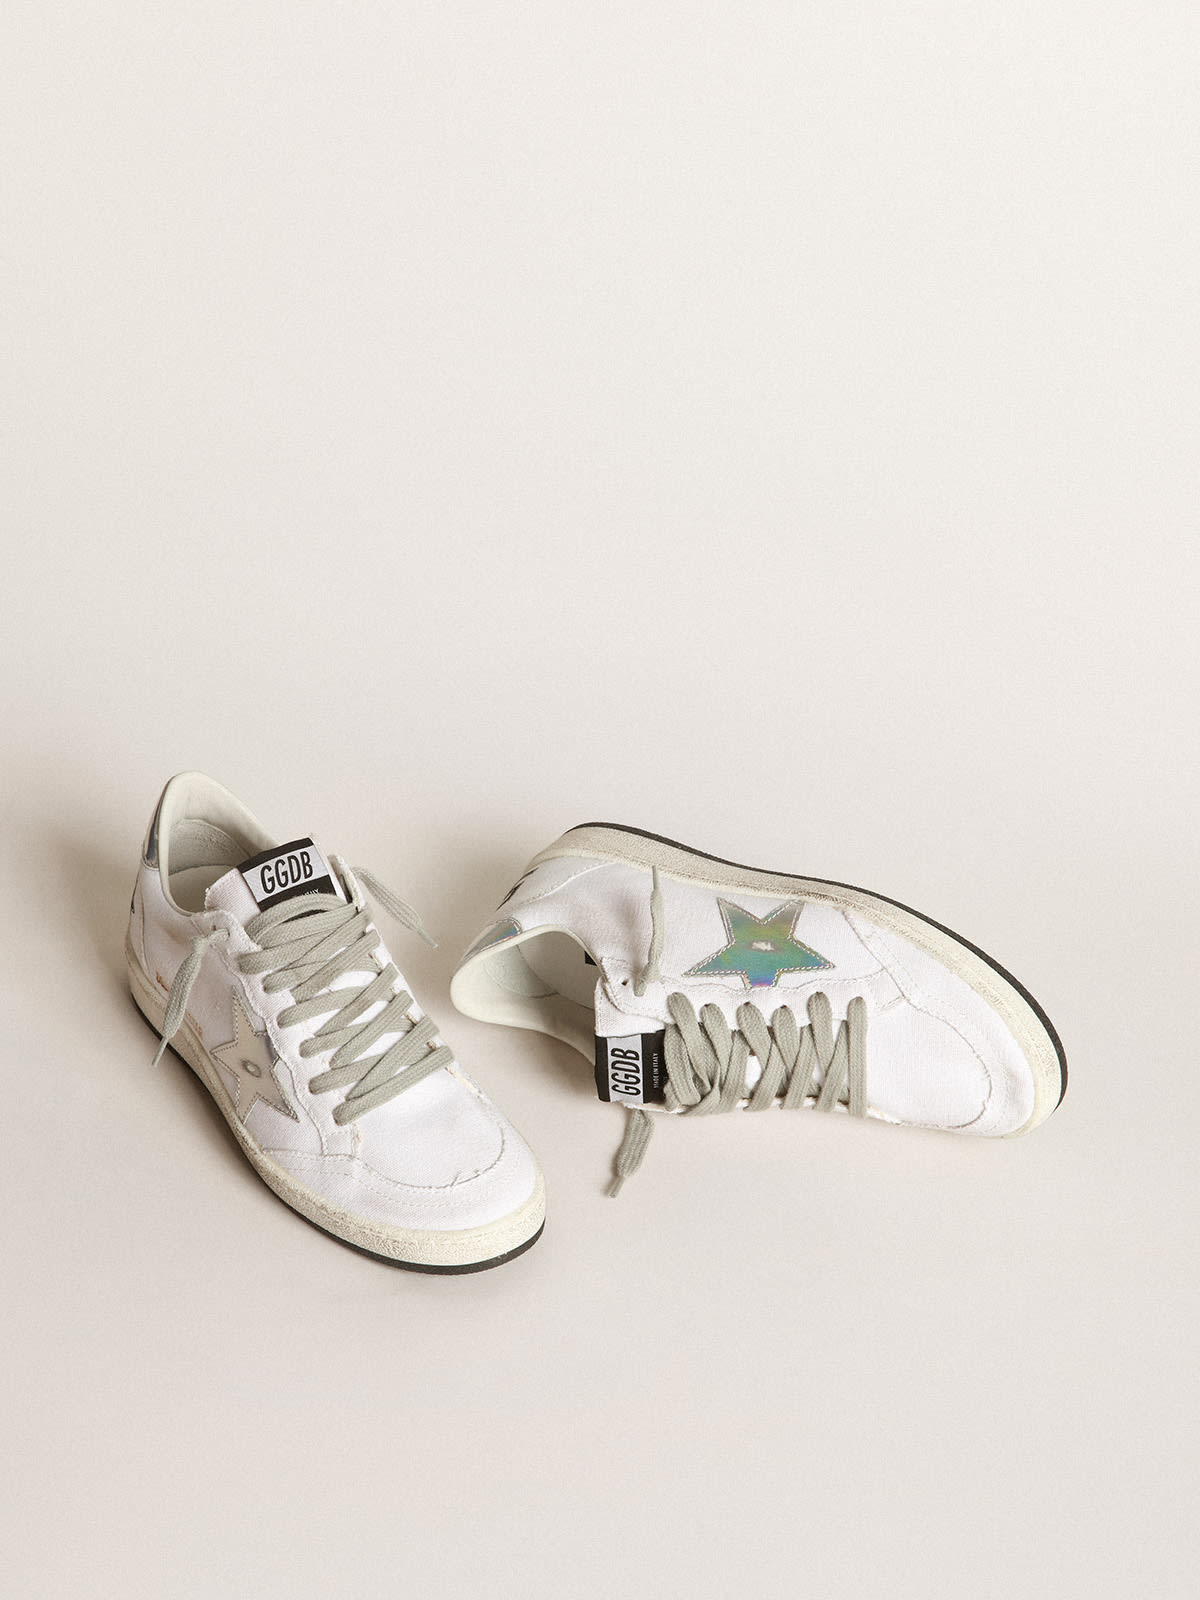 Golden Goose - Ball Star sneakers in white canvas with iridescent leather star and heel tab in 